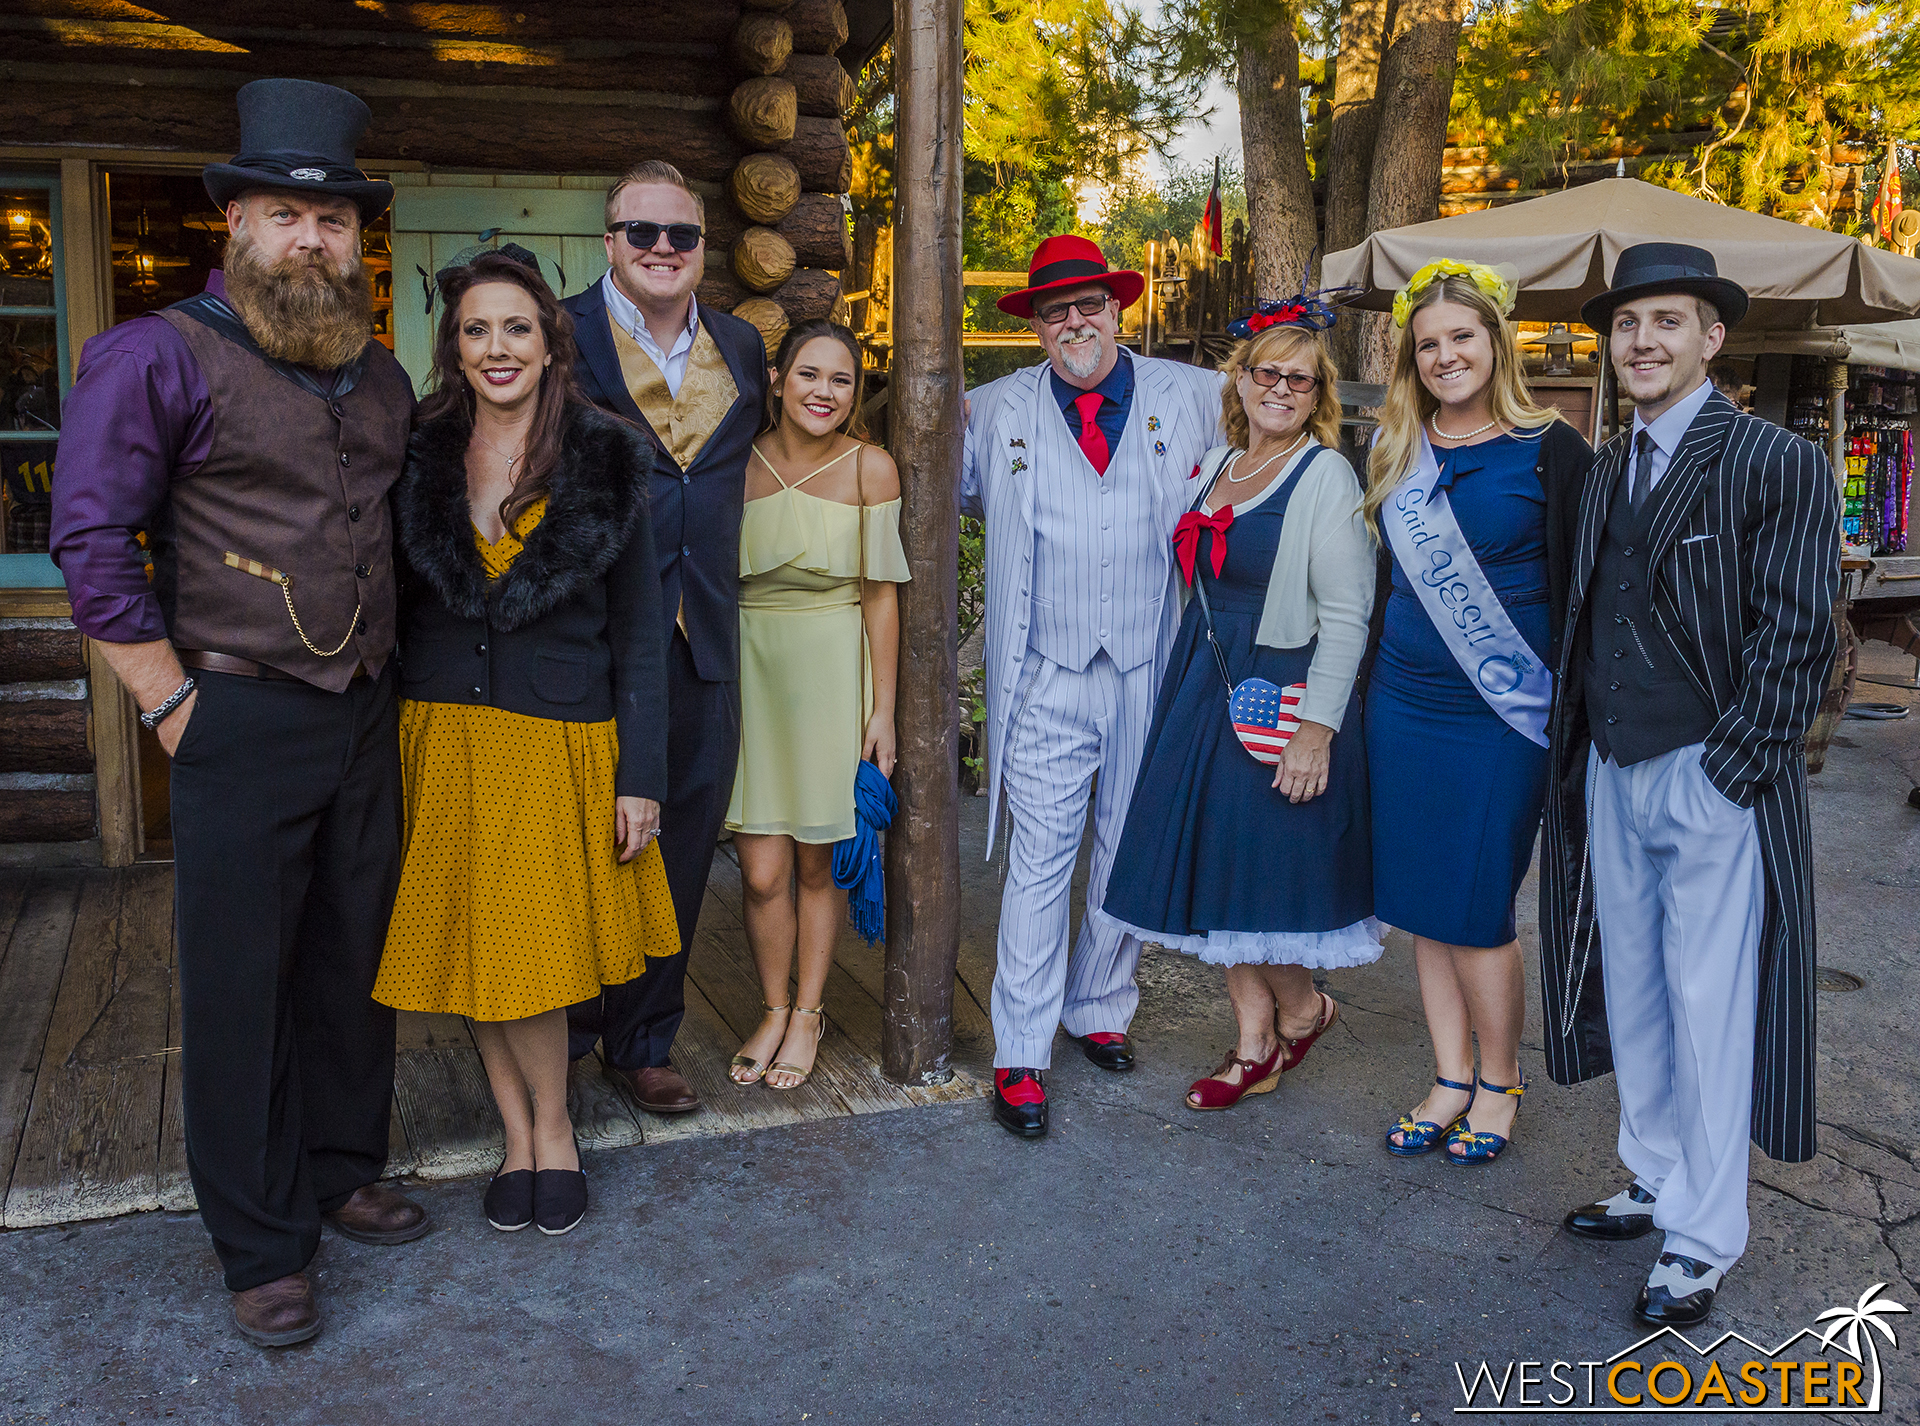  Meanwhile, this group was celebrating Dapper Day and an in-park engagement! 